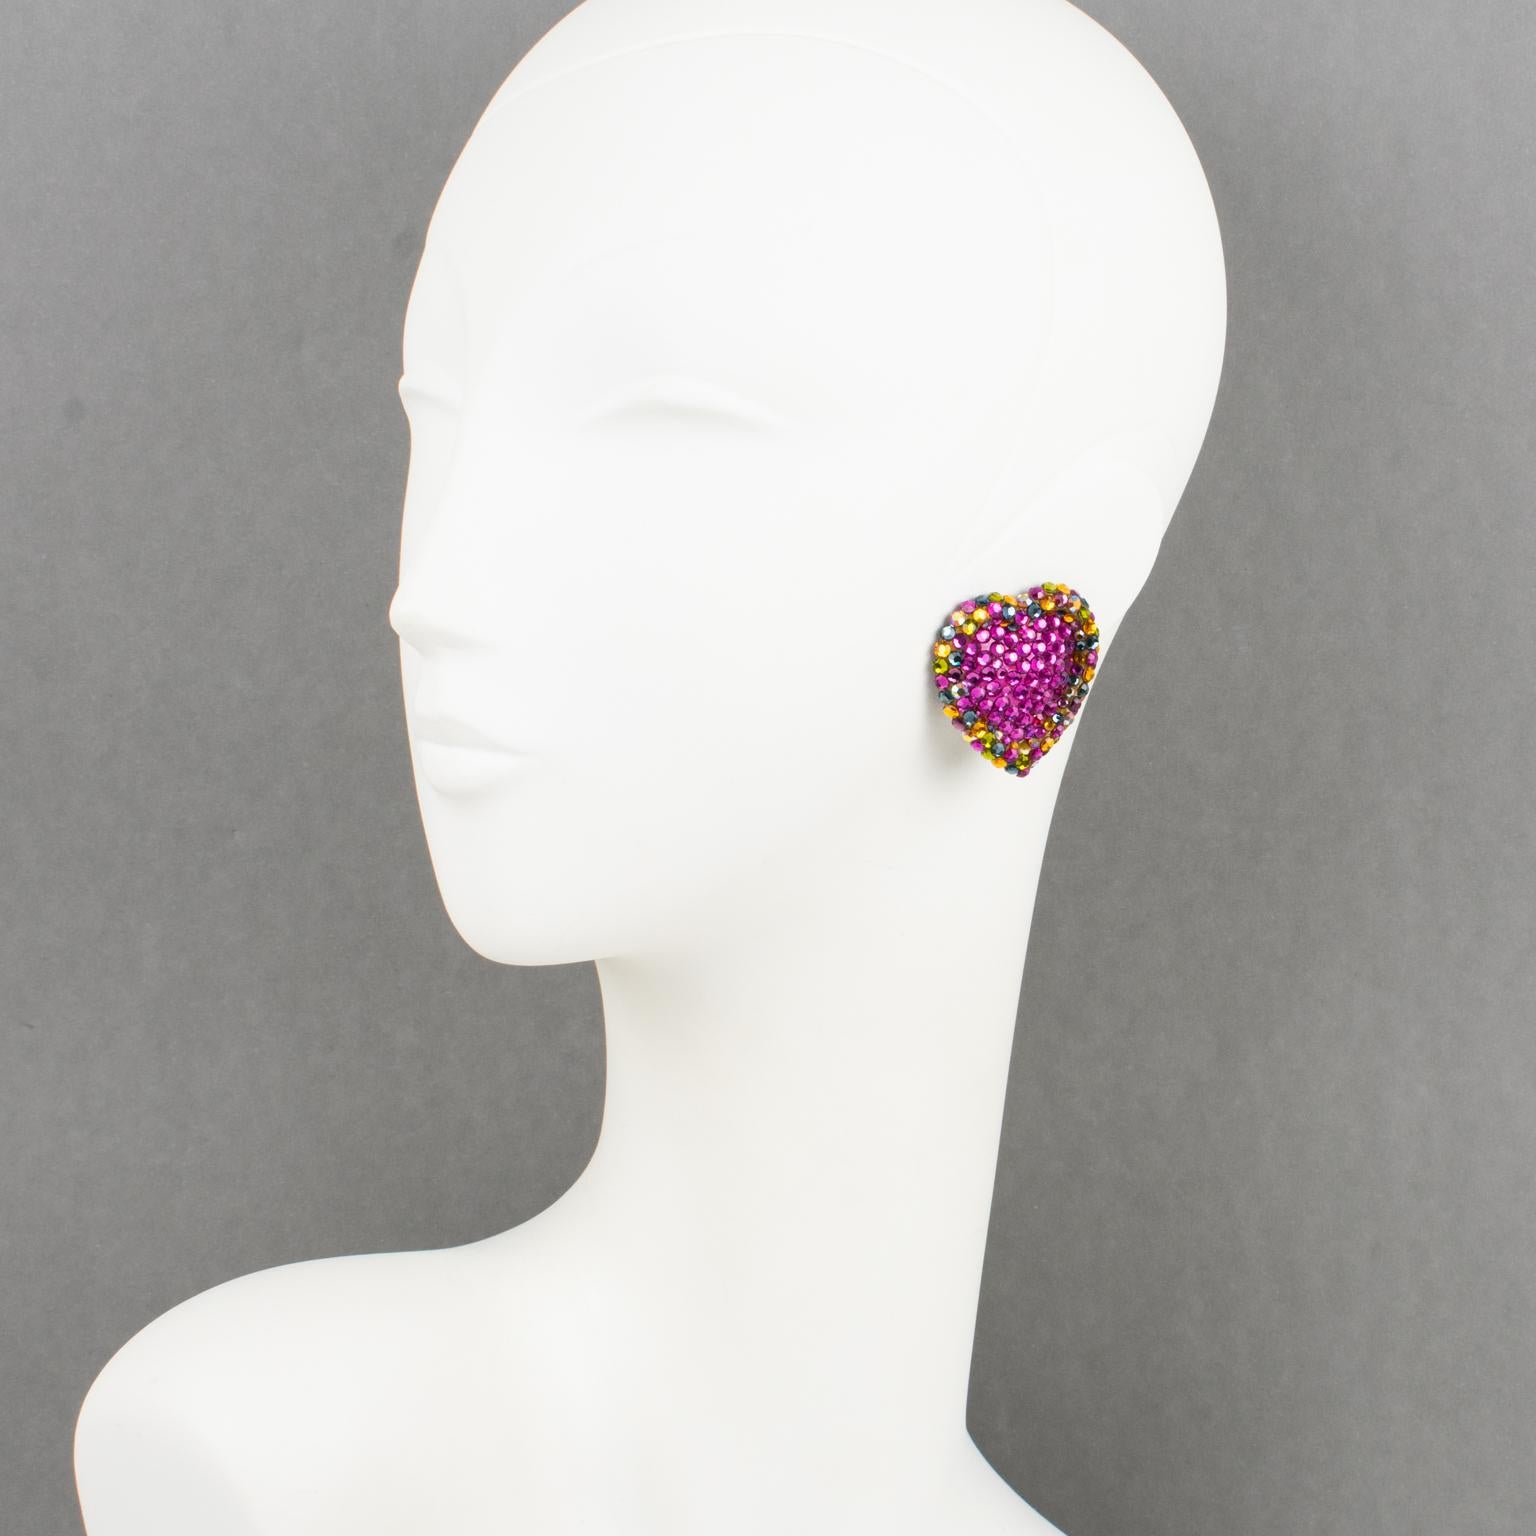 Richard Kerr designed these gorgeous clip-on earrings in the 1980s. They are made of his signature pave rhinestones. 
They feature an oversized heart shape covered with multicolor crystal rhinestones. The earrings are set on a black resin background